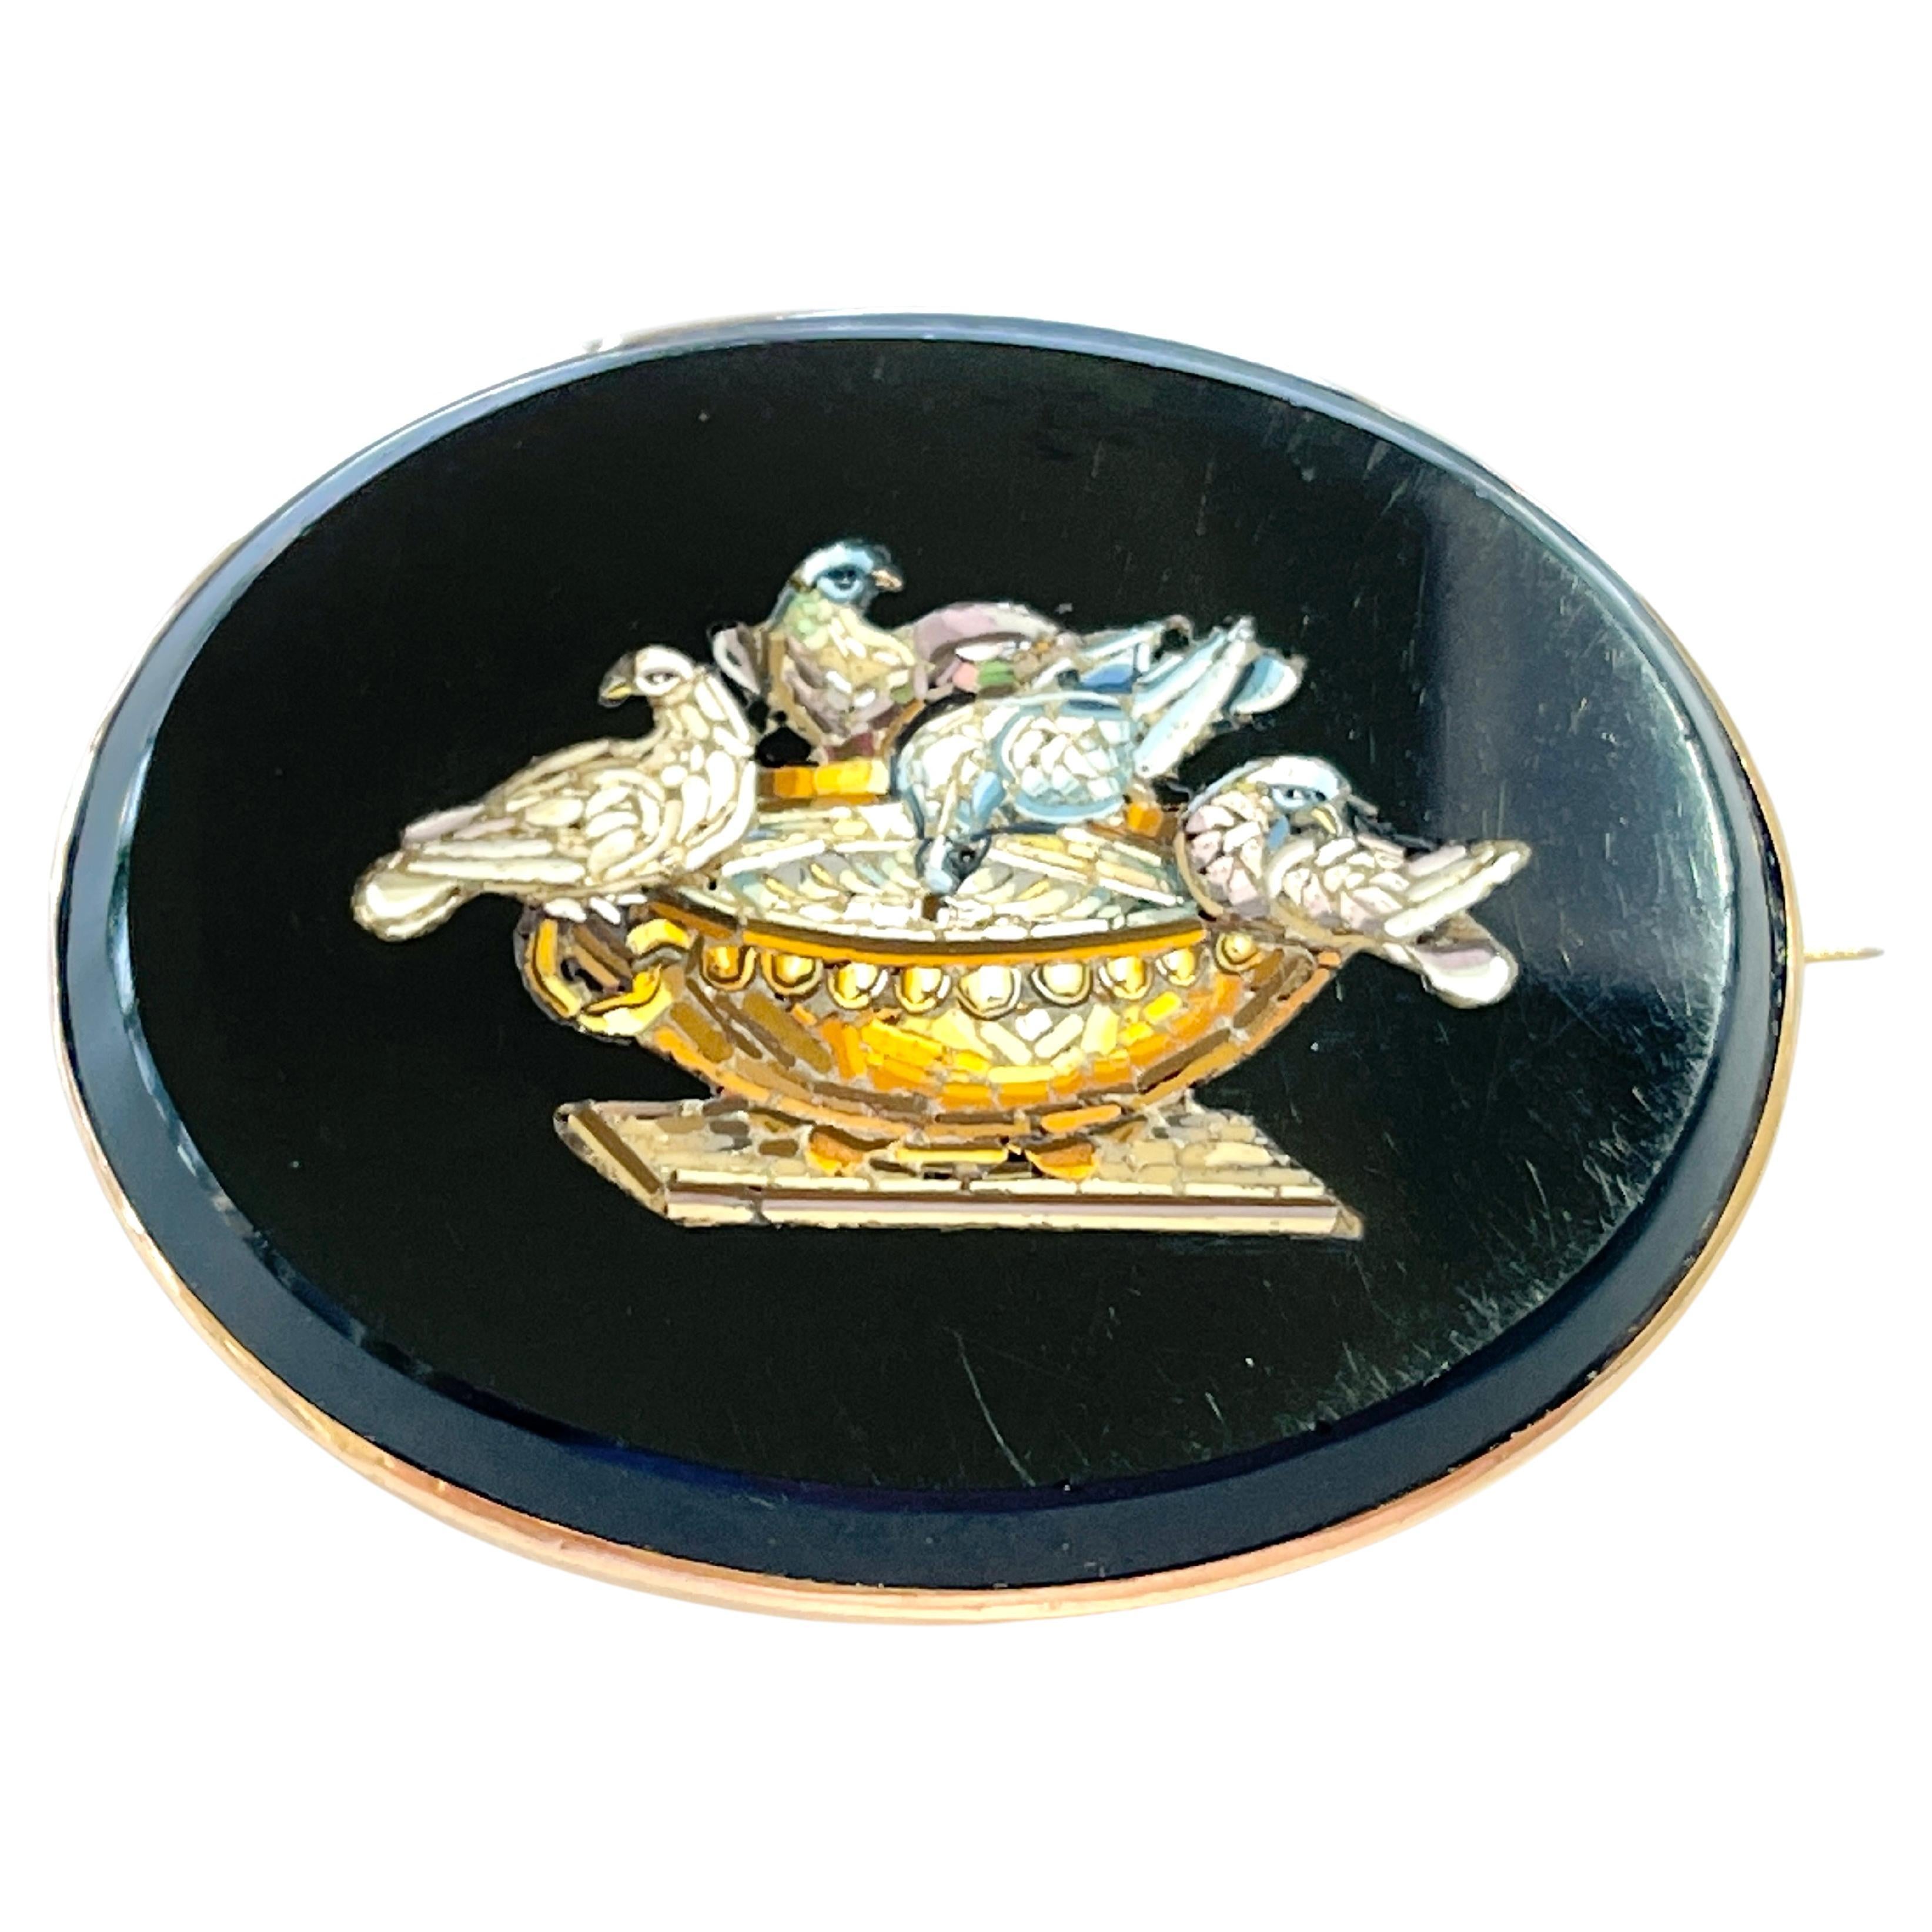 We are thrilled to offer you some high quality, Micro Mosaic pieces!
This stunning brooch example embodies the Era of the 'Grand Tour' c1880s.
It features the ‘Doves of Pliny’ created in micro pieces of coloured glass inlayed into a black glass